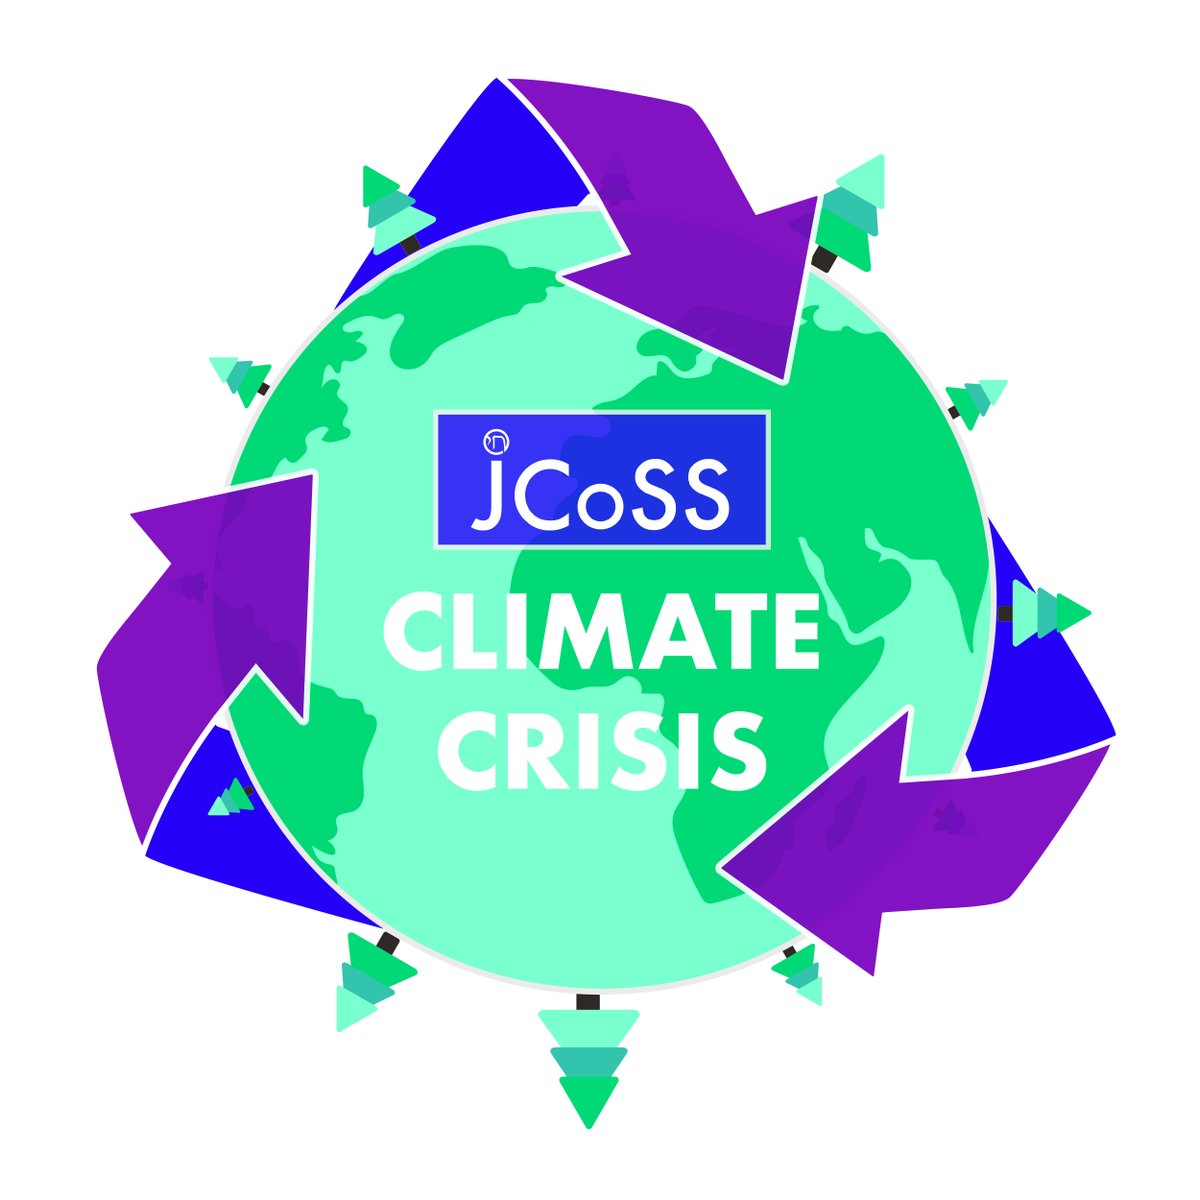 Today on Tu b’shevat, Y13 student Ruben Persey has declared a Climate Emergency at JCoSS. Every student in the school has made a personal pledge for how they will change to help reduce the school’s emissions footprint. We are proud our students want to make a crucial difference.